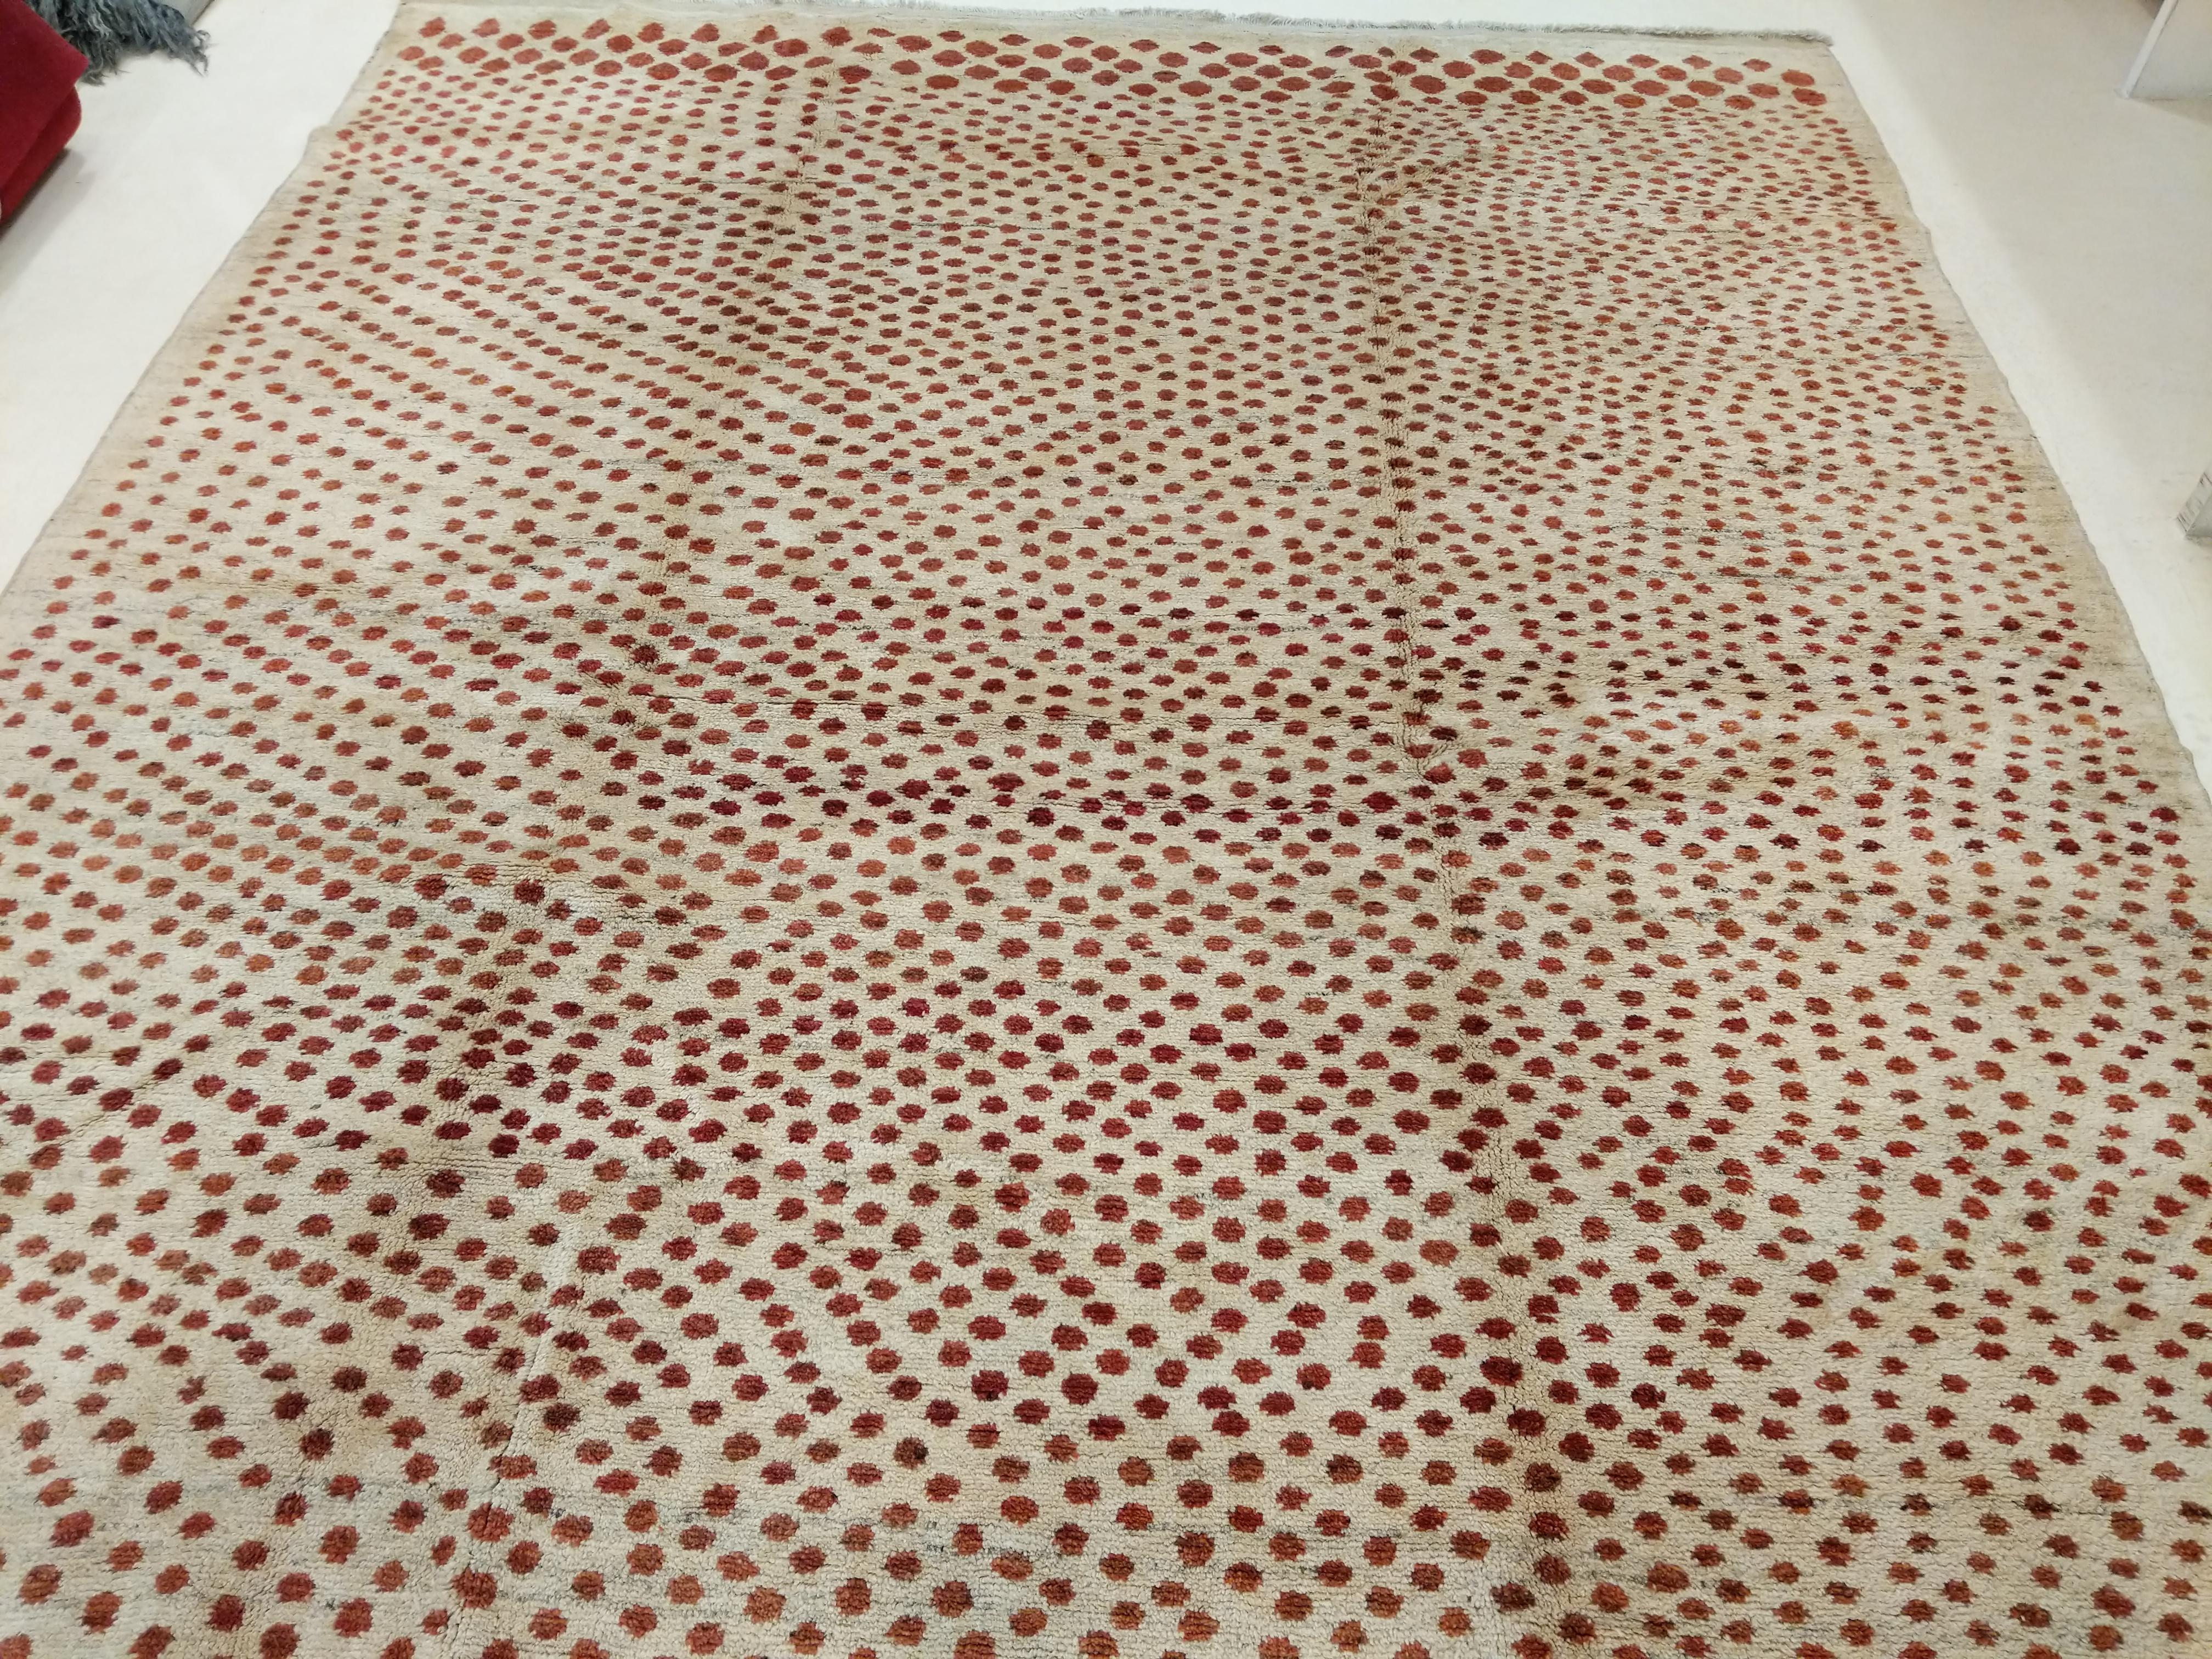 A finely woven wool rug distinguished by a pointillist pattern of red dots of different dimensions punctuating a natural beige background. The resulting pattern mimics the design we see on leopard skins, and has great decorative appeal. Rugs of this